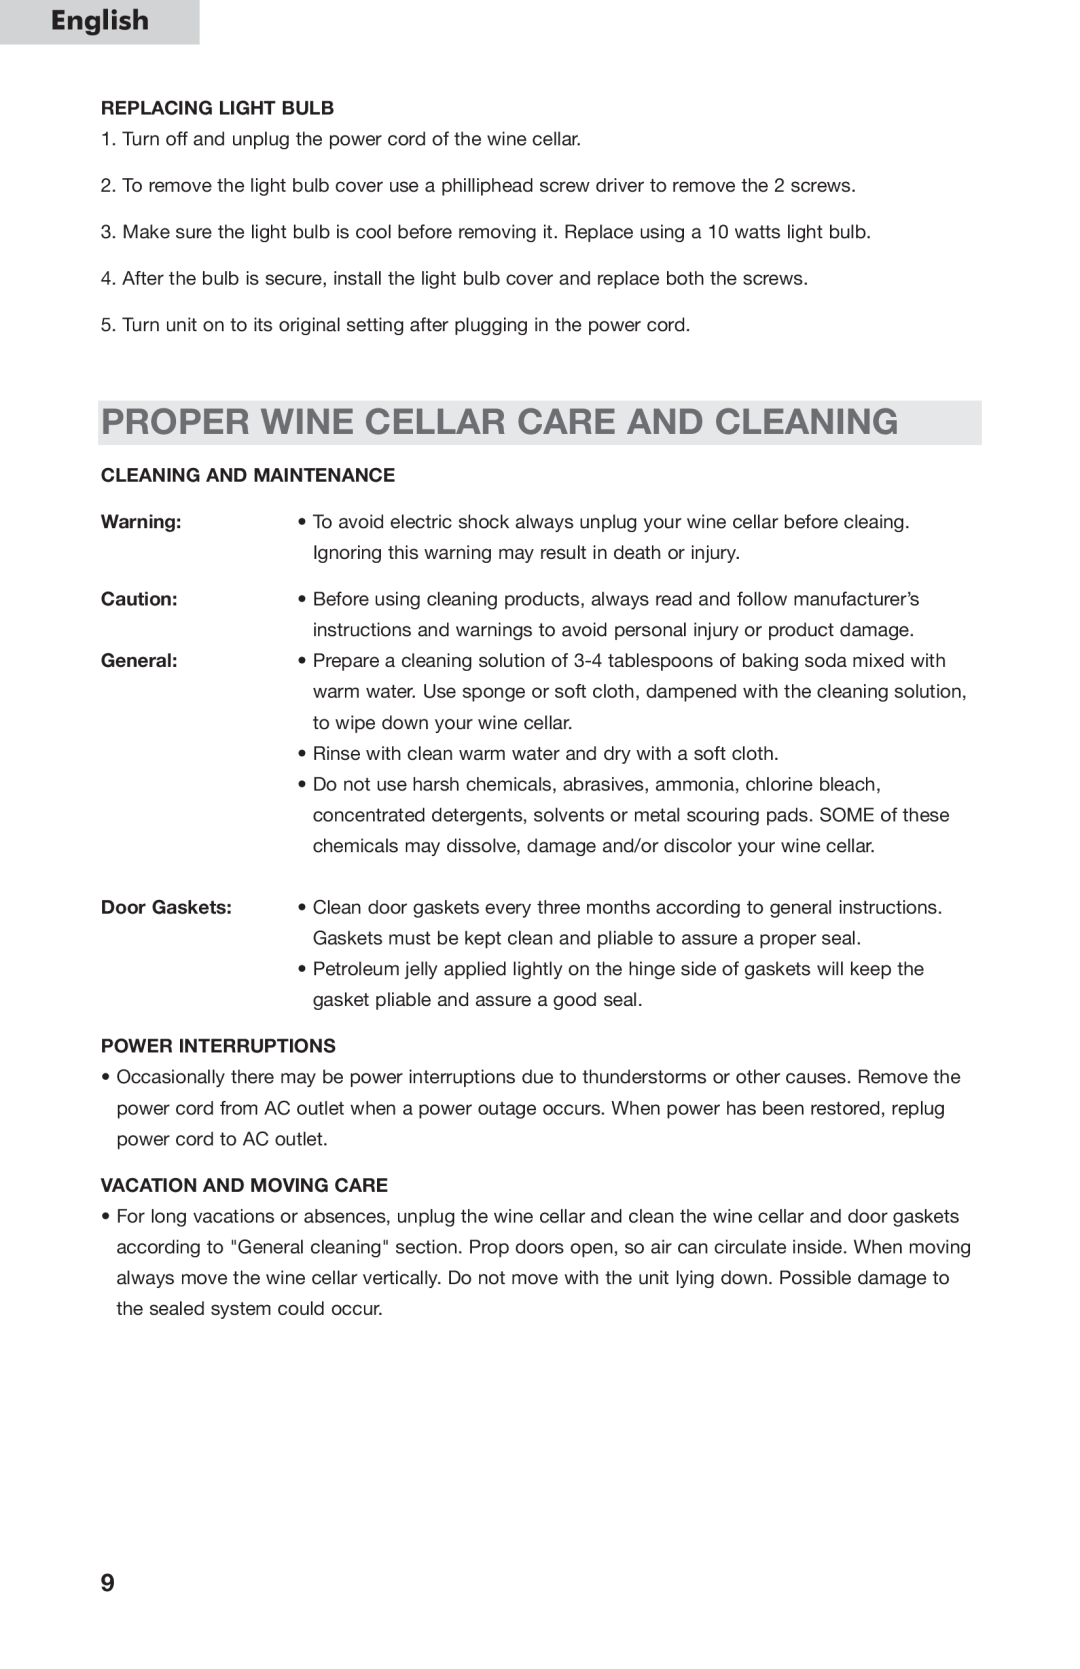 Haier HVC24B, HVCE24 Proper Wine Cellar Care And Cleaning, English, Replacing Light Bulb, Cleaning And Maintenance 